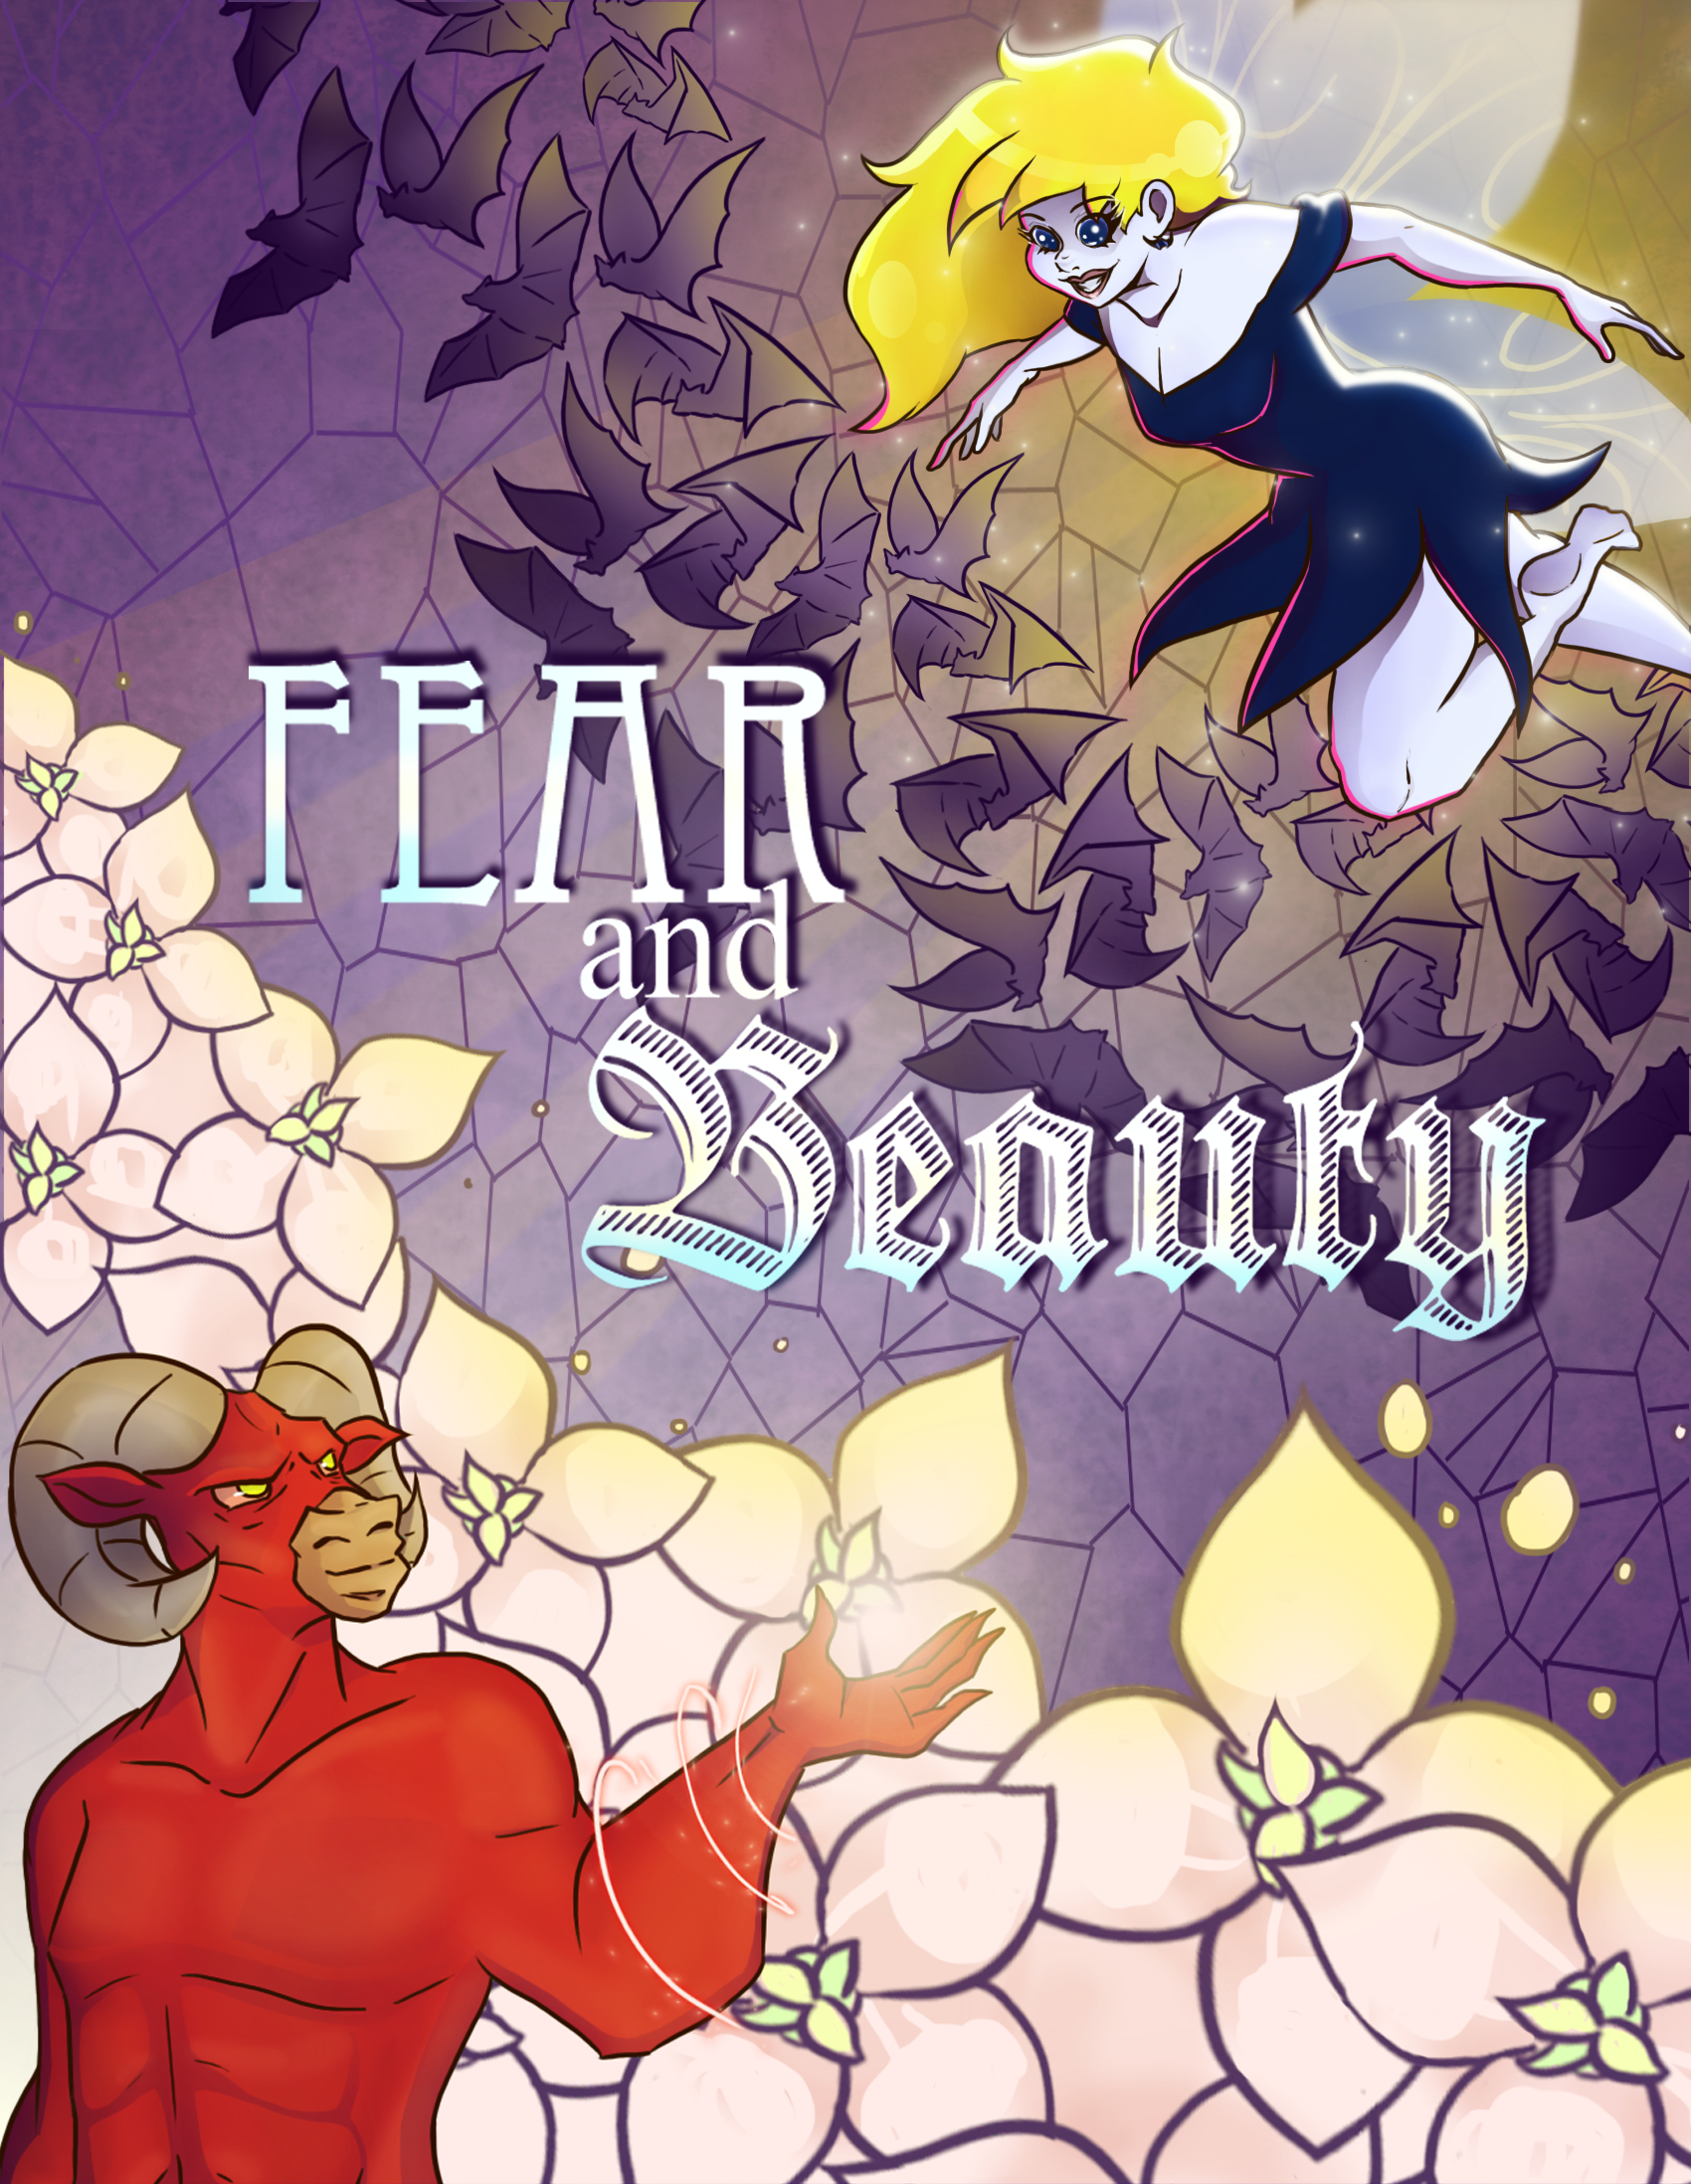 Fear and Beauty